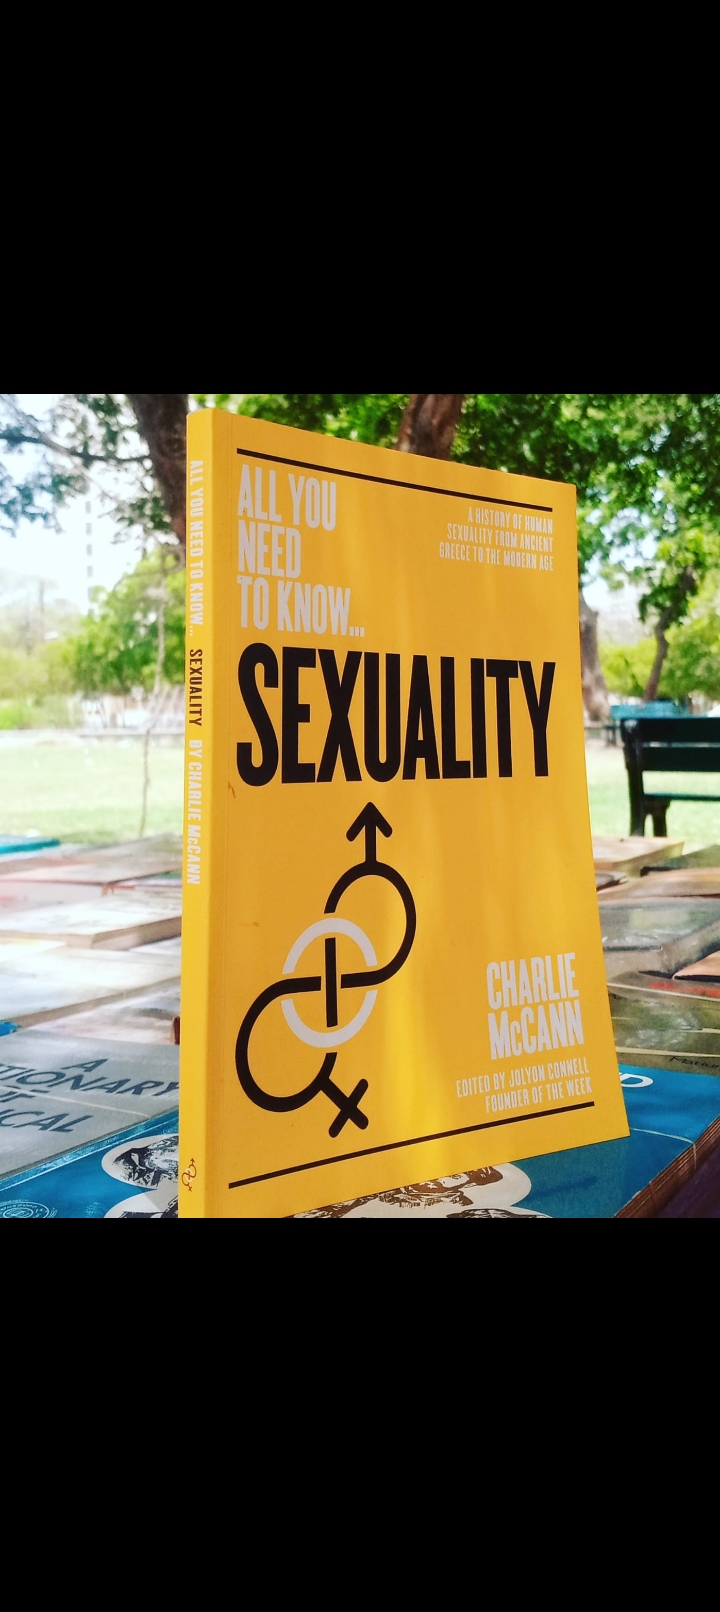 all you need to know... sexuality by charlie mccann. original new paperback